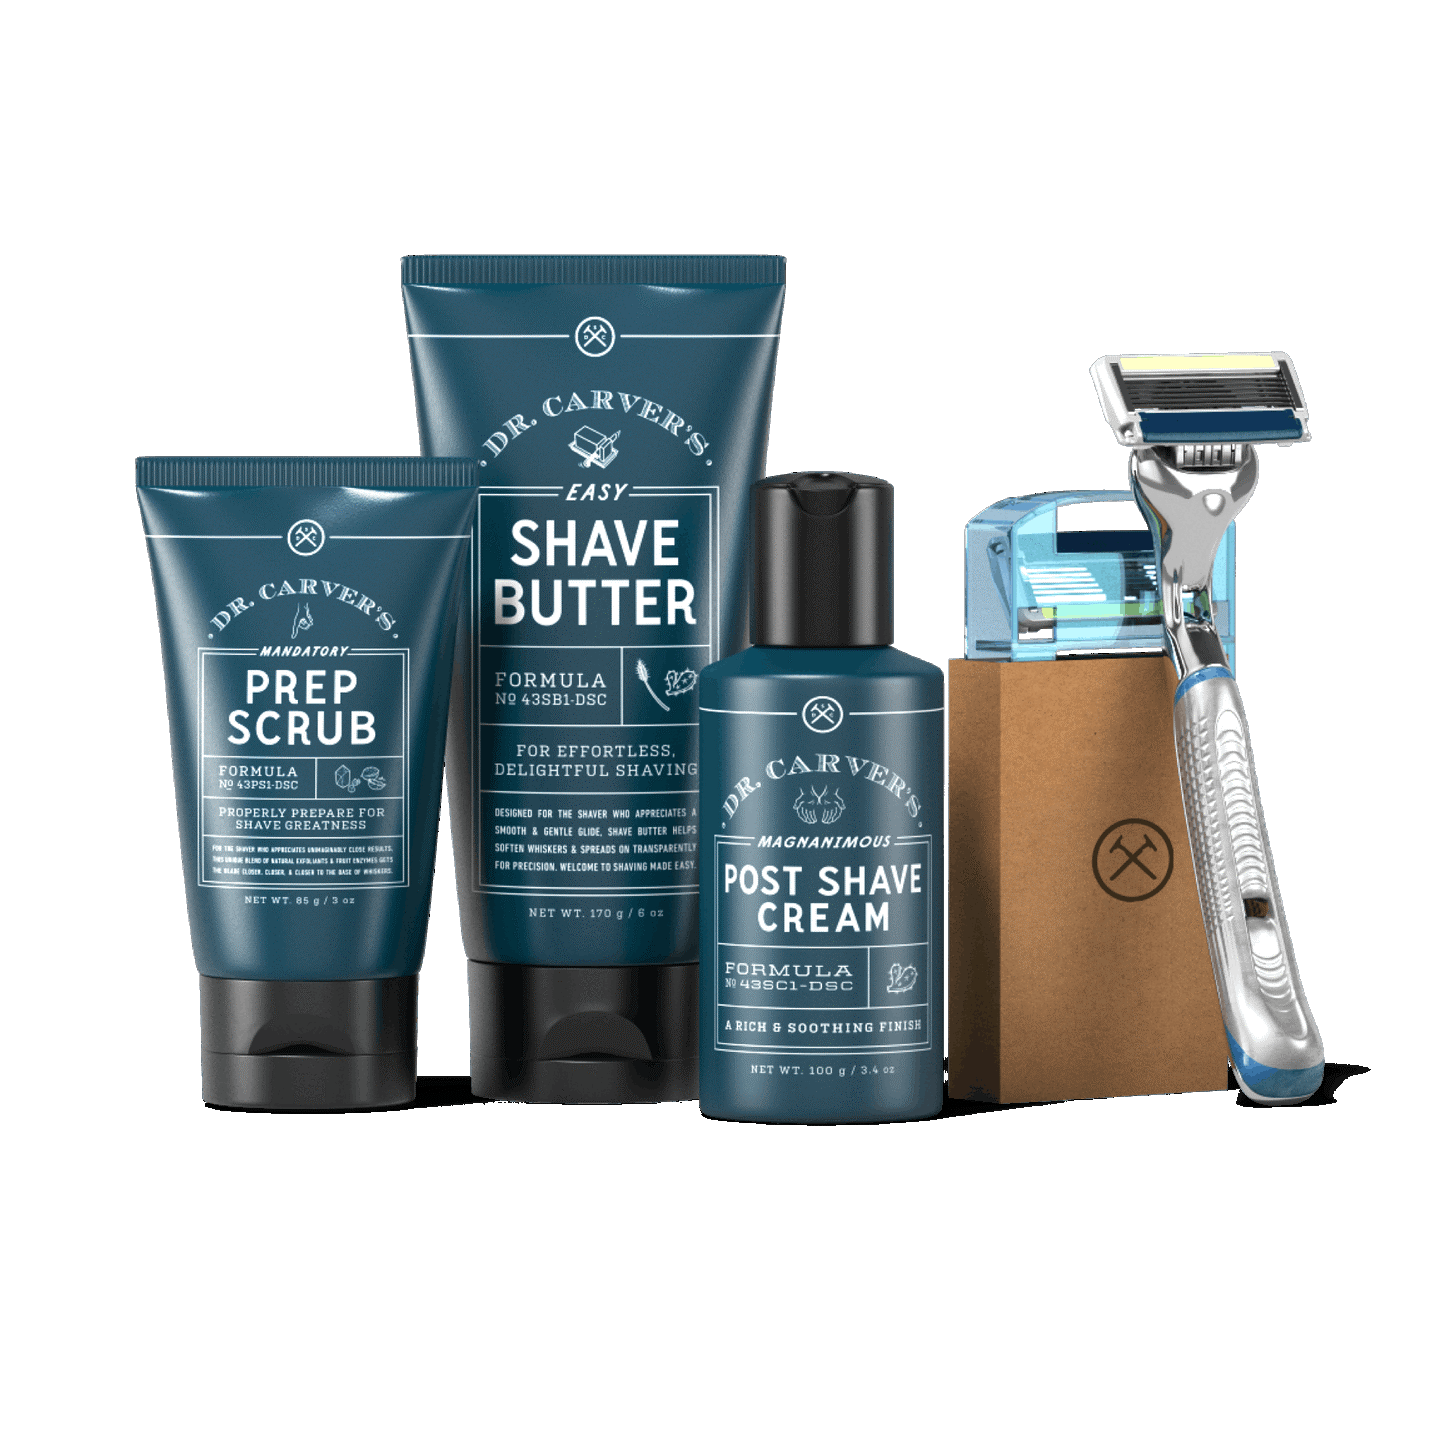 Brands That Have Leveraged the Direct-to-Consumer Marketing Model - Dollar Shave Club